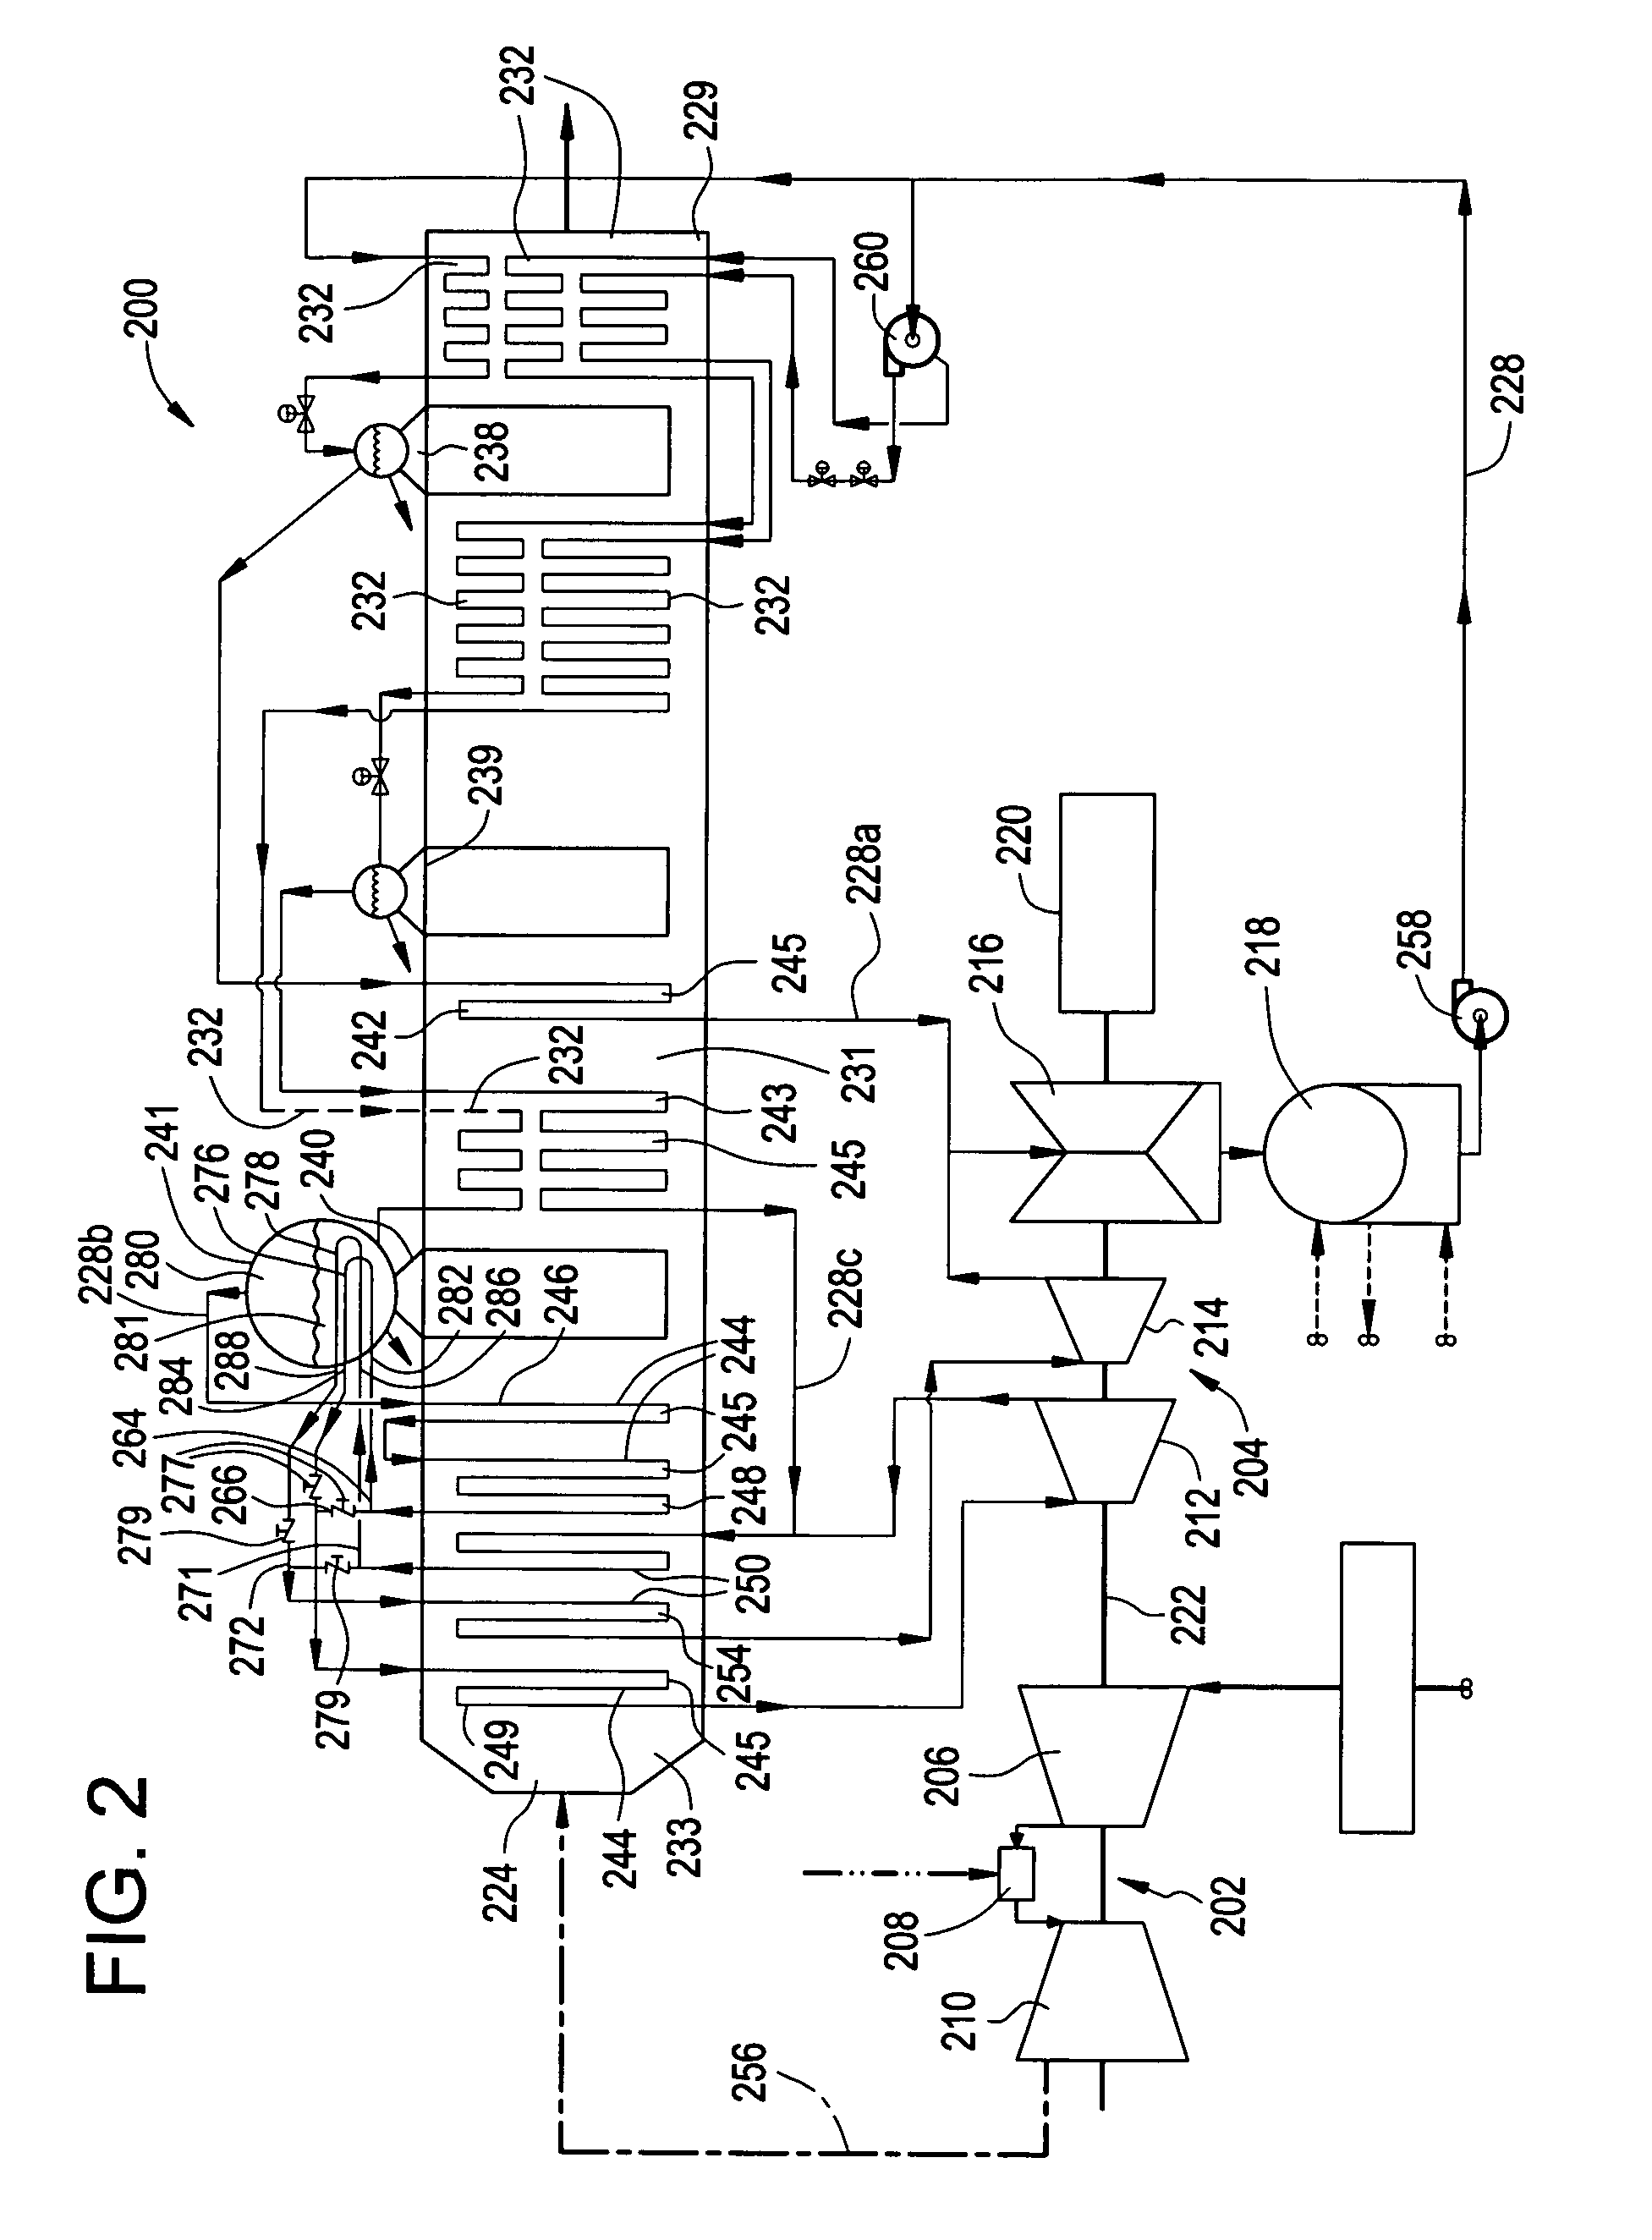 System for controlling steam temperature